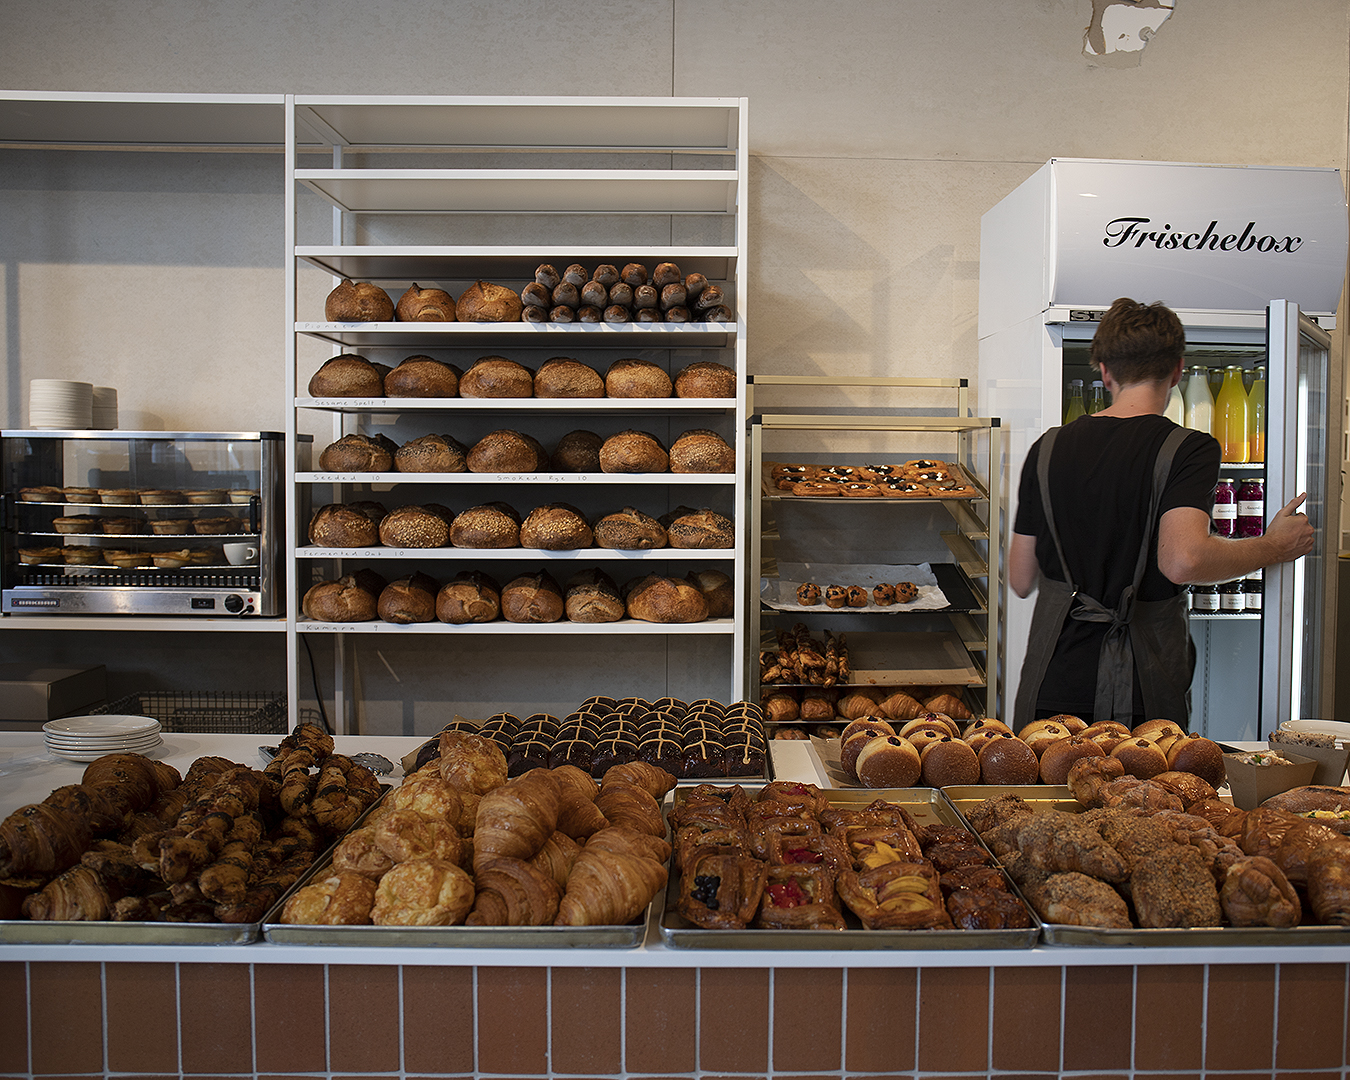 A server dives into the chiller cabinet at Daily Bread with an array of delicious baked goods in the foreground.